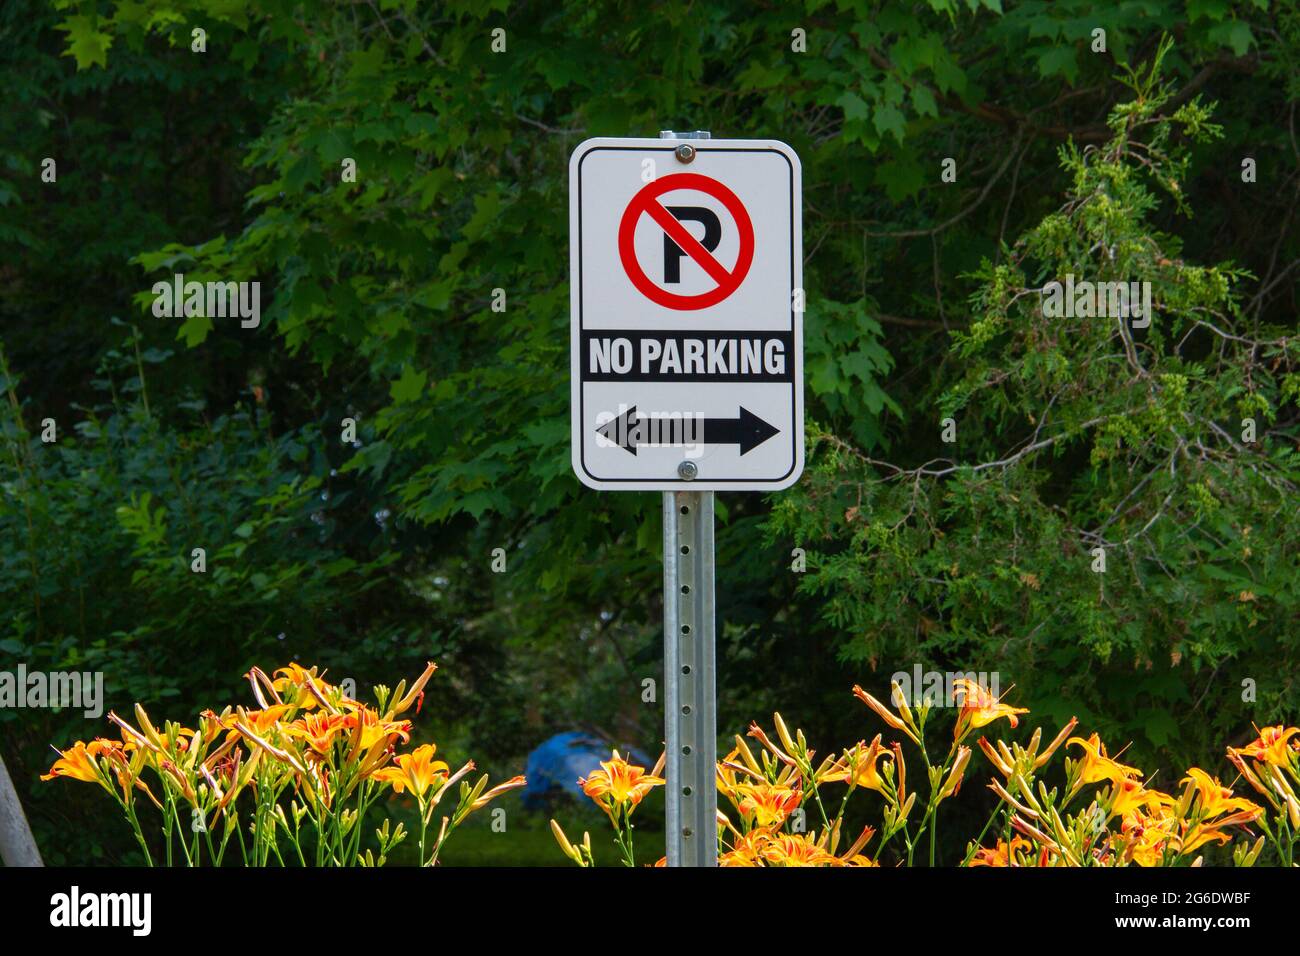 No parking sign among flowers Stock Photo